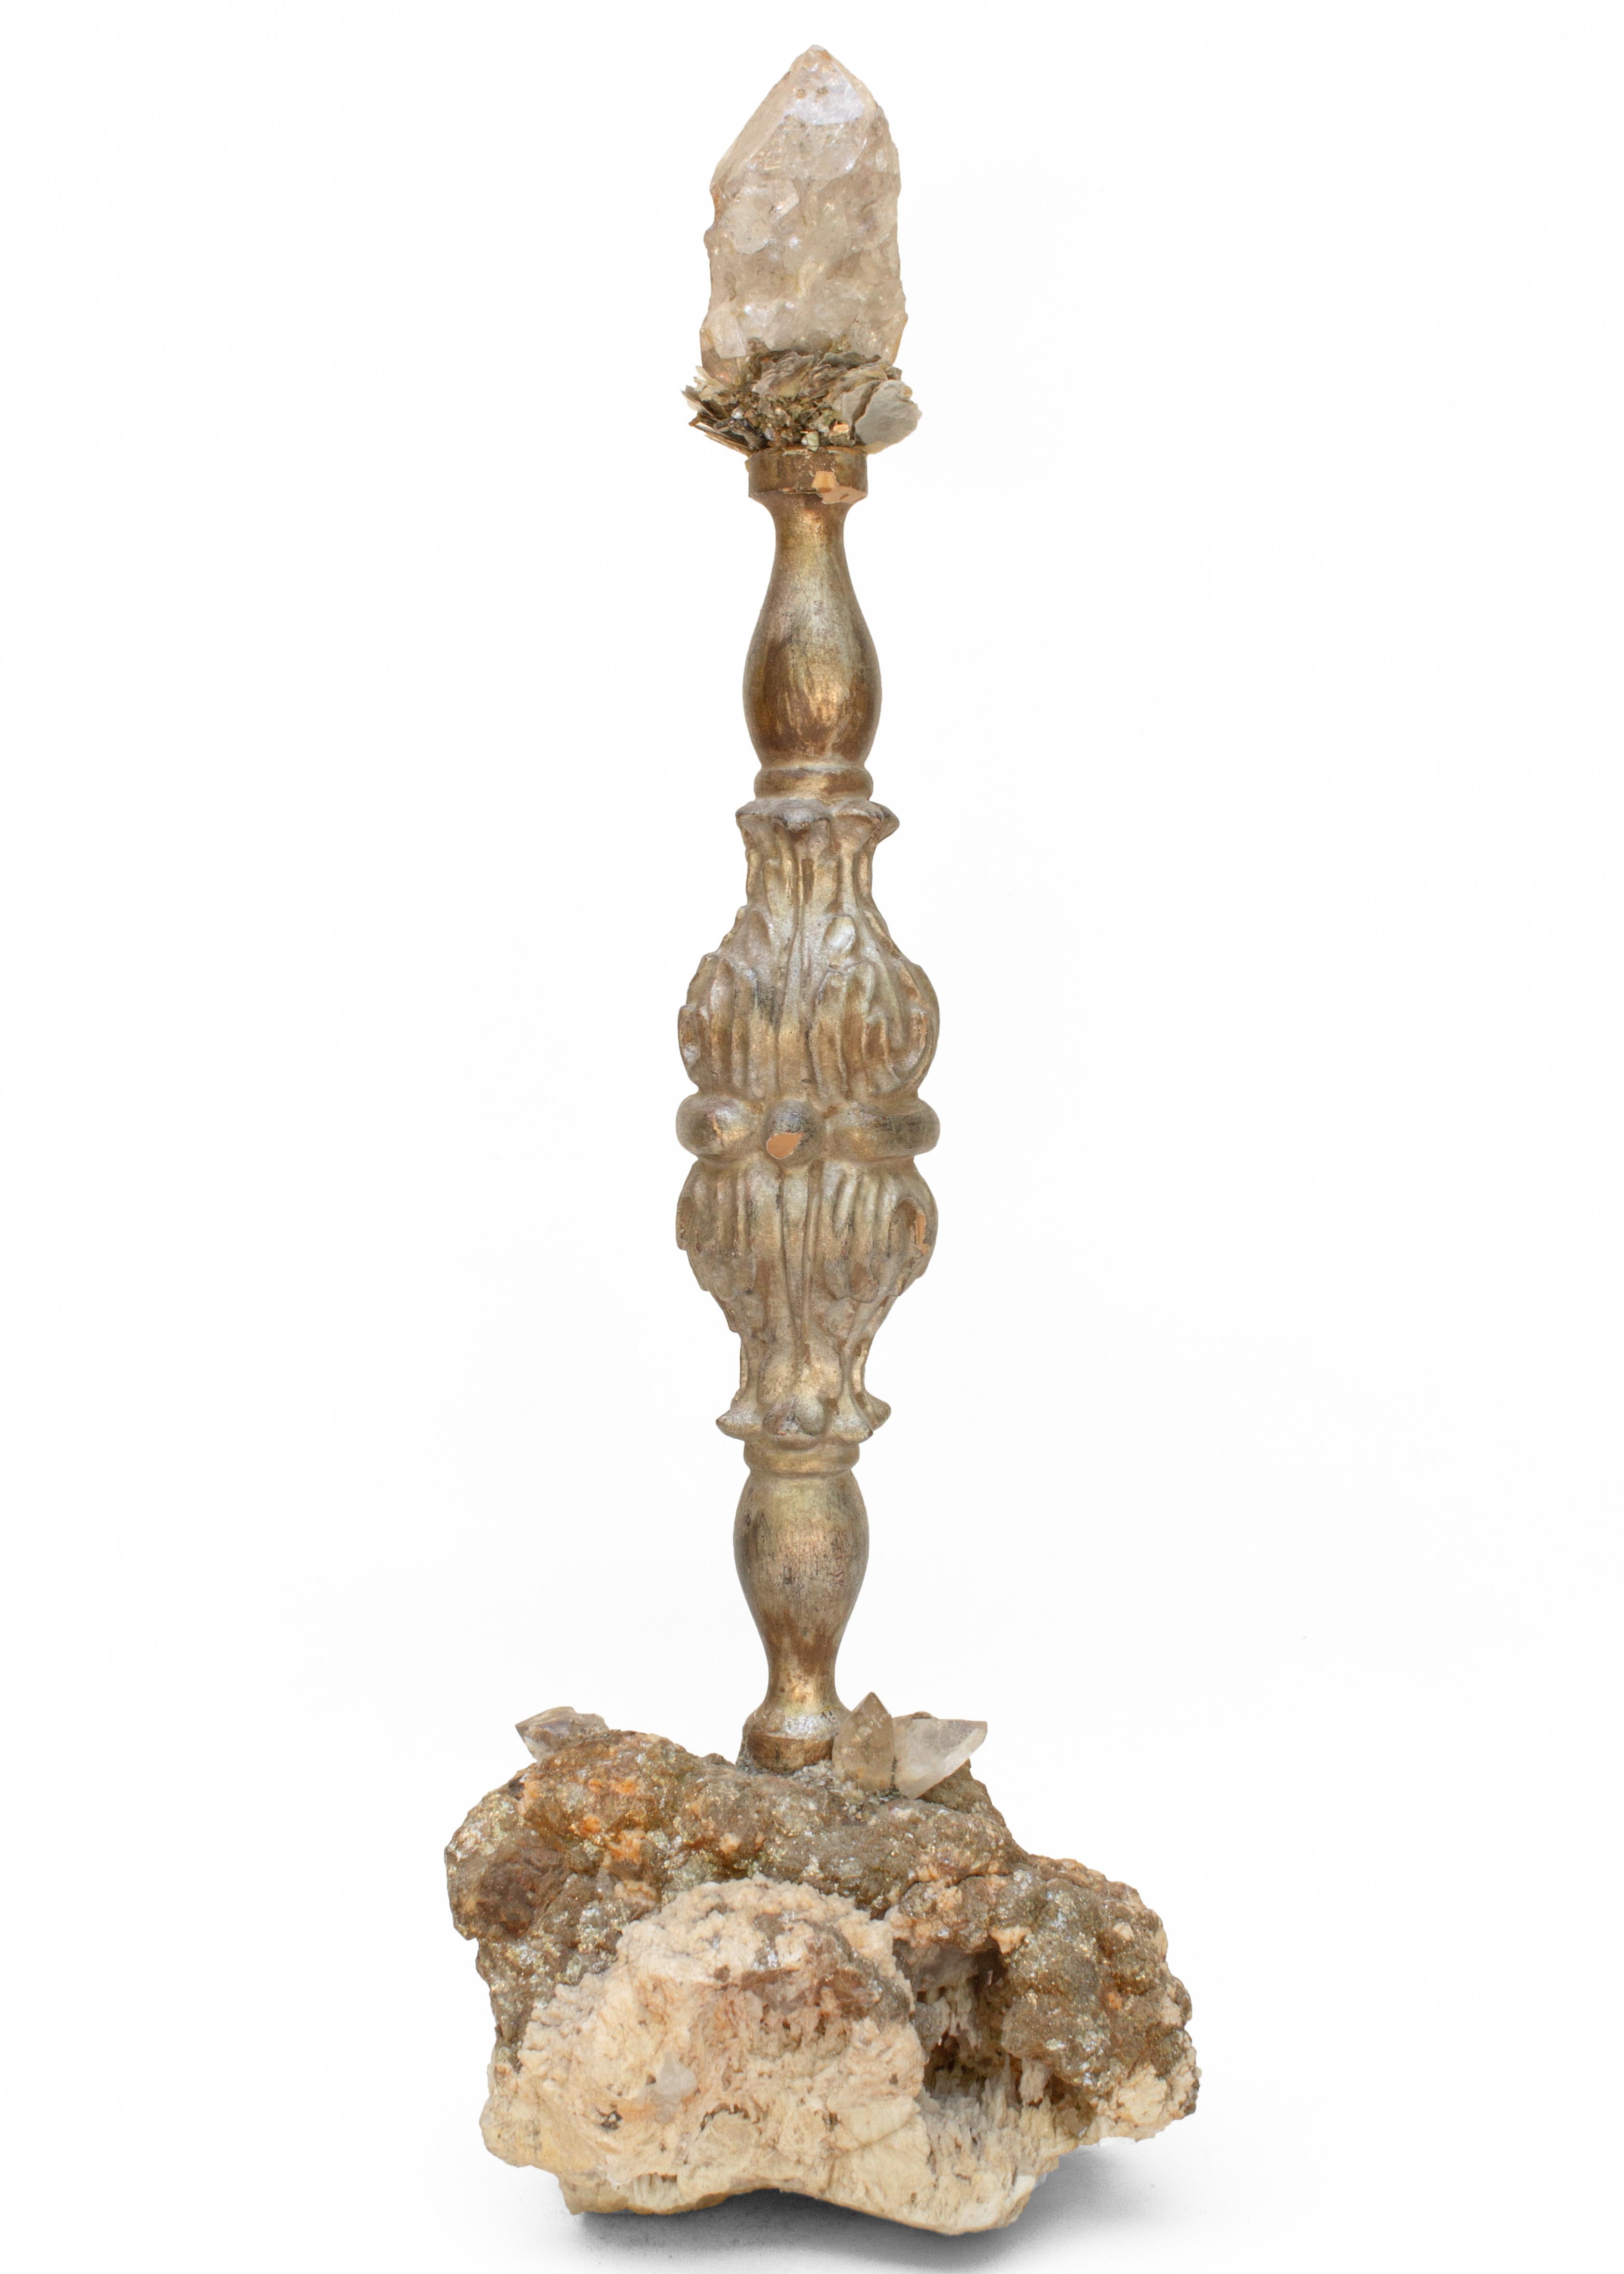 18th Century and Earlier 18th Century Italian Silver Candlestick with Herkimer Diamond on Mica in Matrix